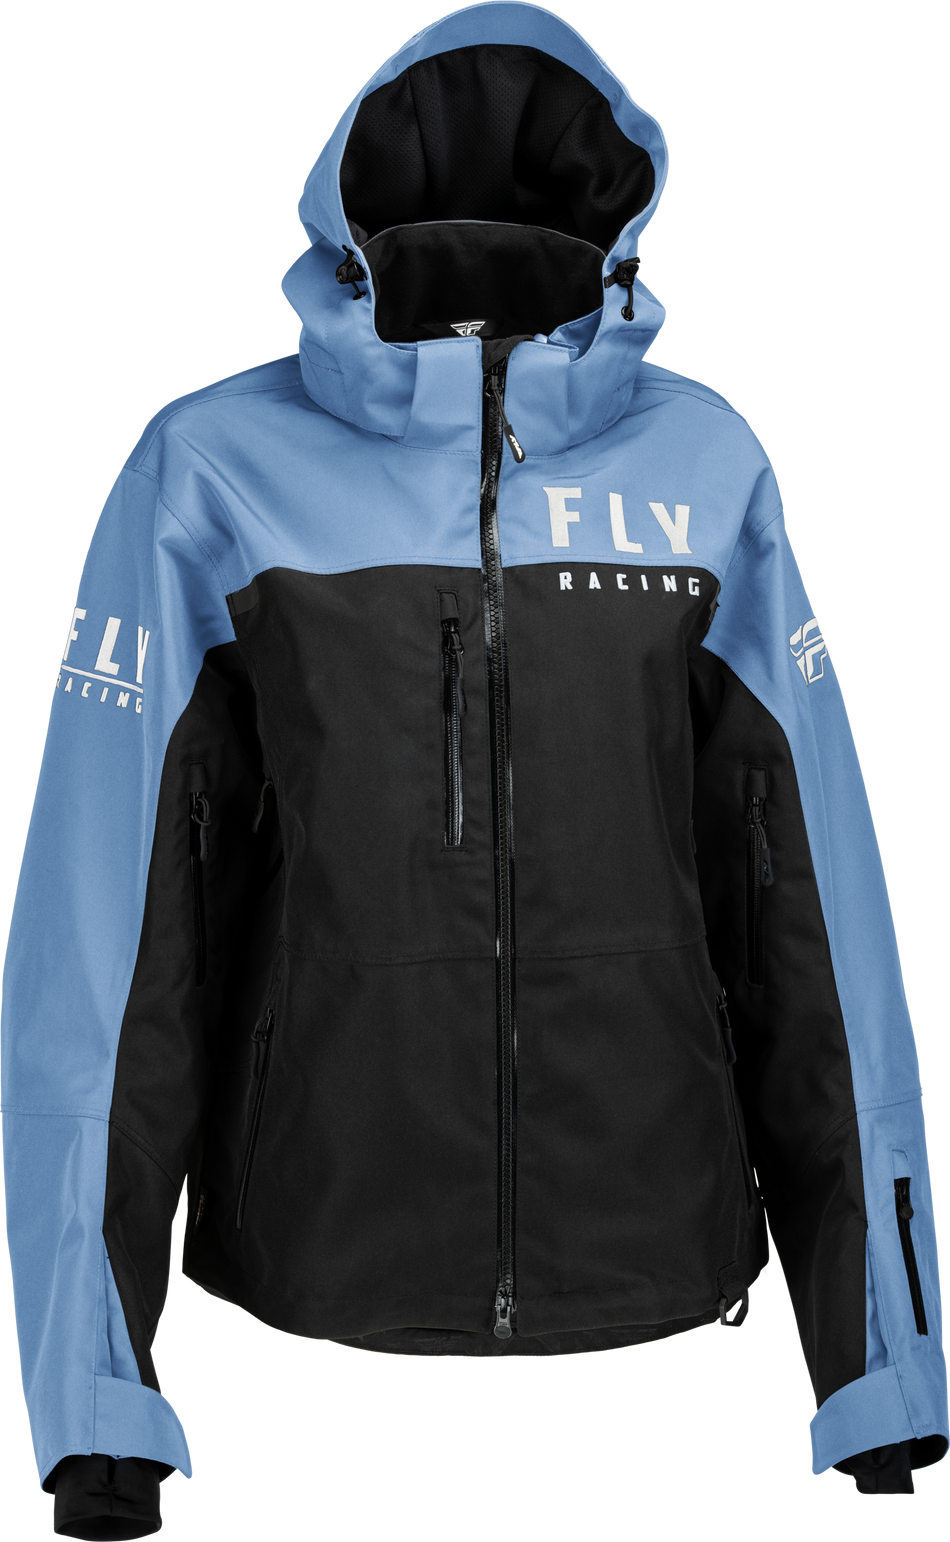 FLY RACING Women's Carbon Jacket Black/Blue Md 470-4501M